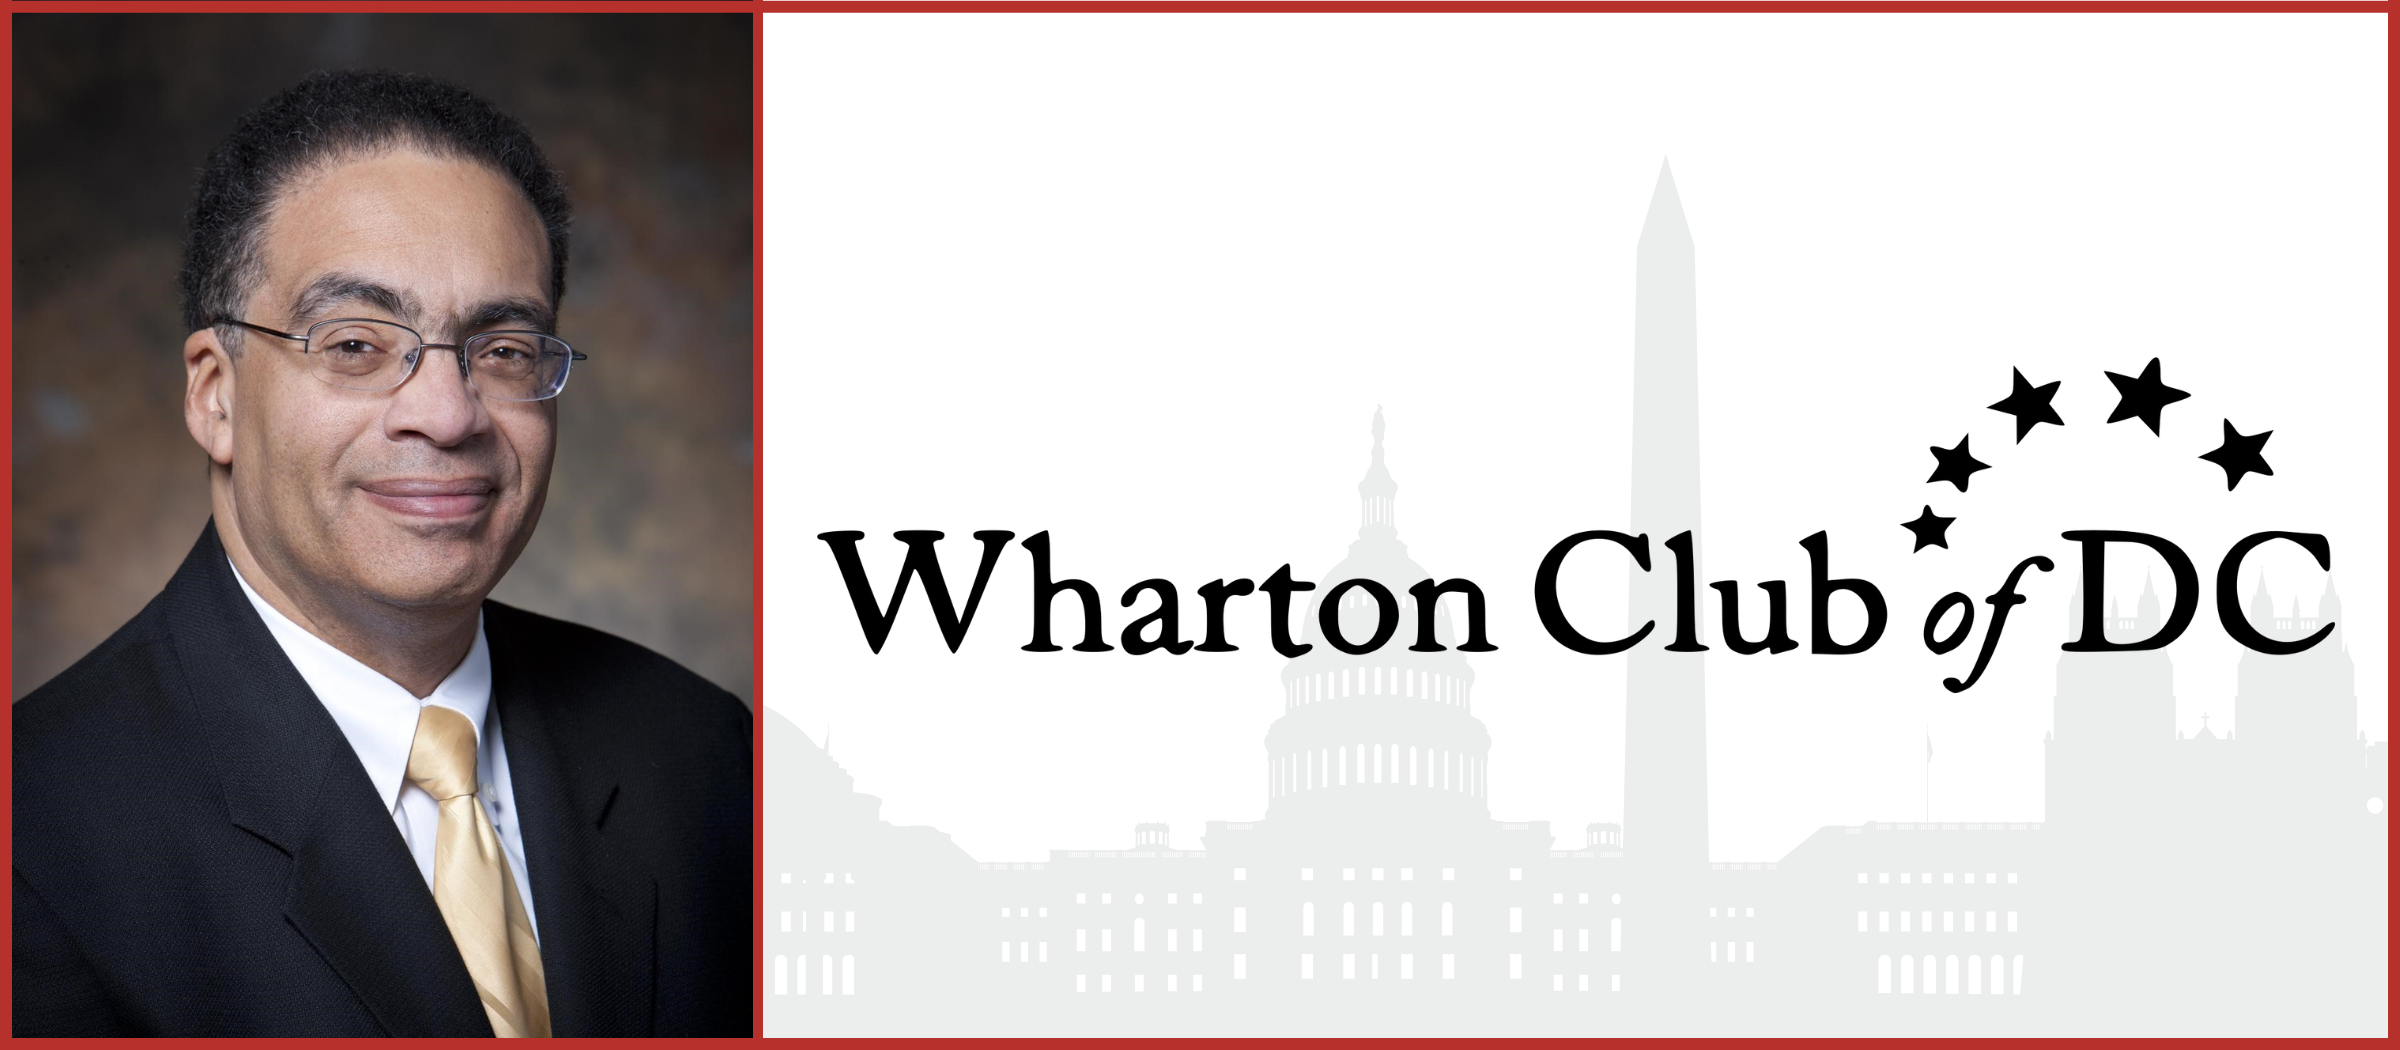 UDC Vice President of Research among Wharton Club of DC honorees